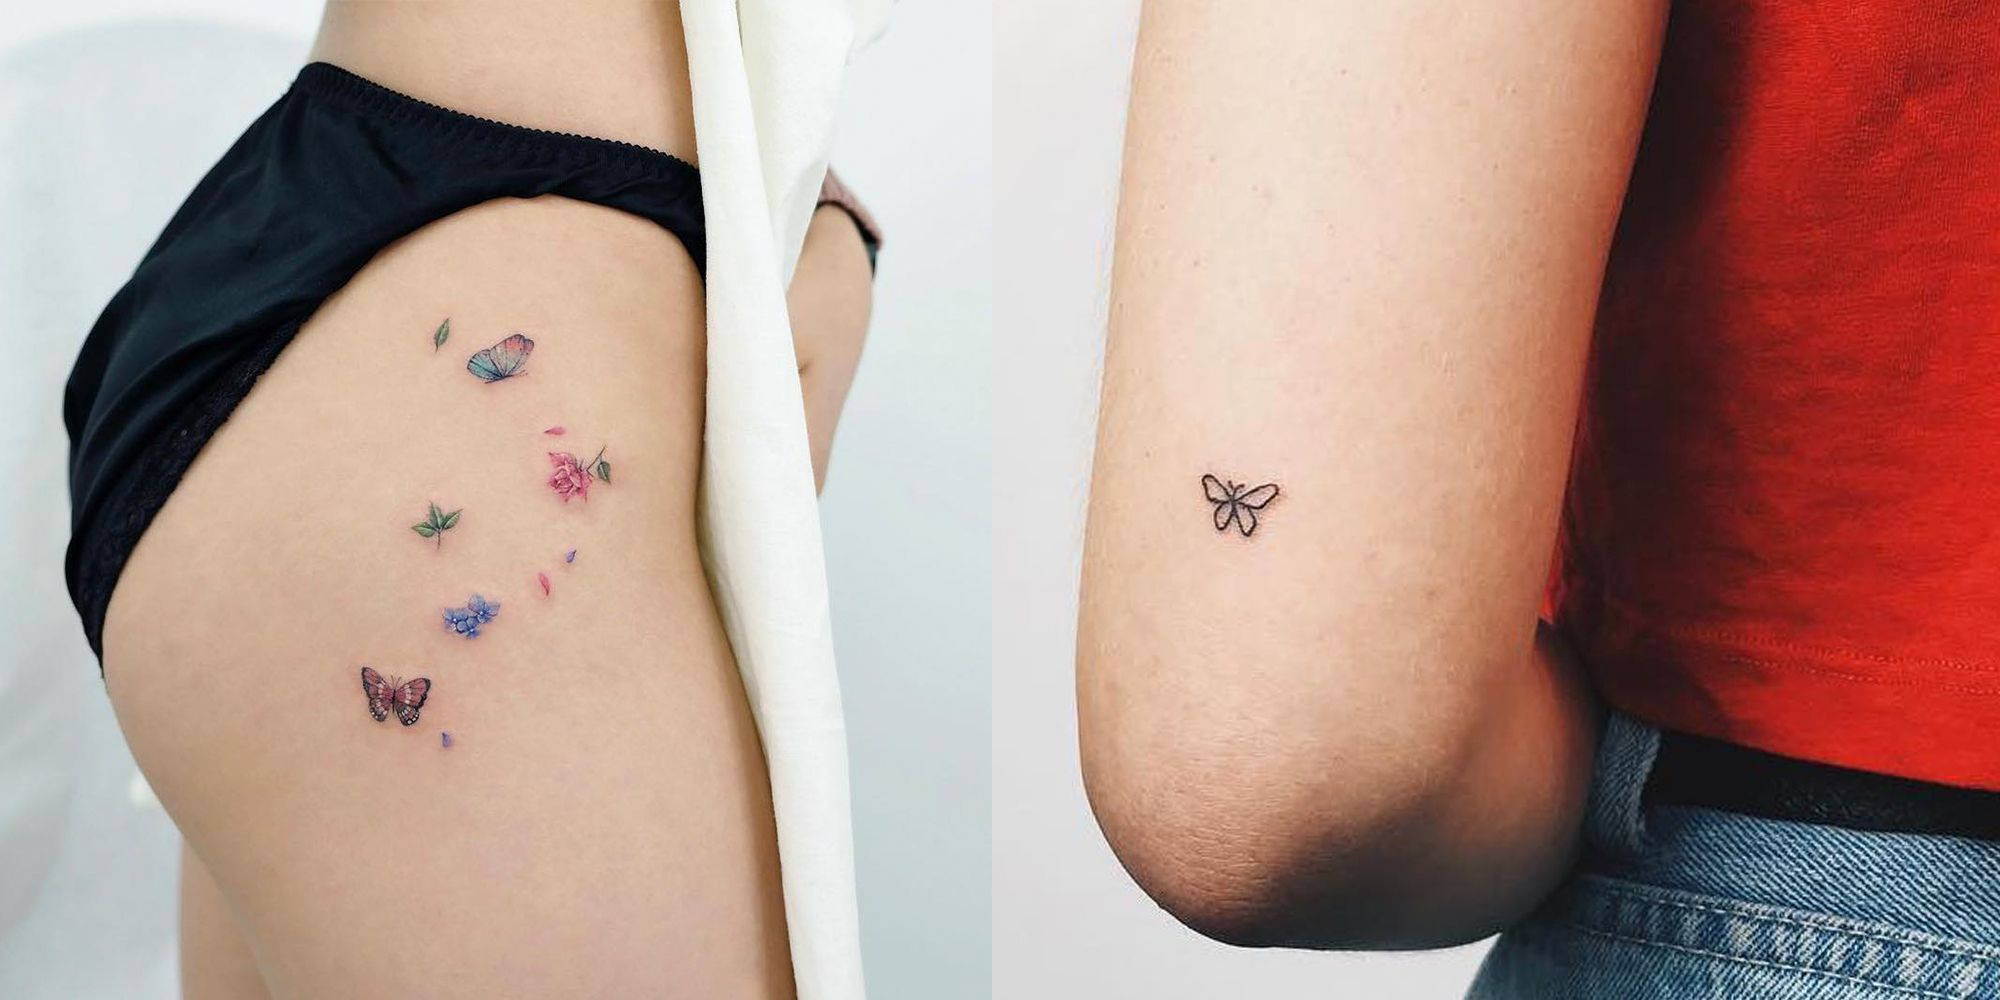 17 Butterfly Tattoo Ideas That Are Pretty Not Tacky Pictures Of for dimensions 2000 X 1000